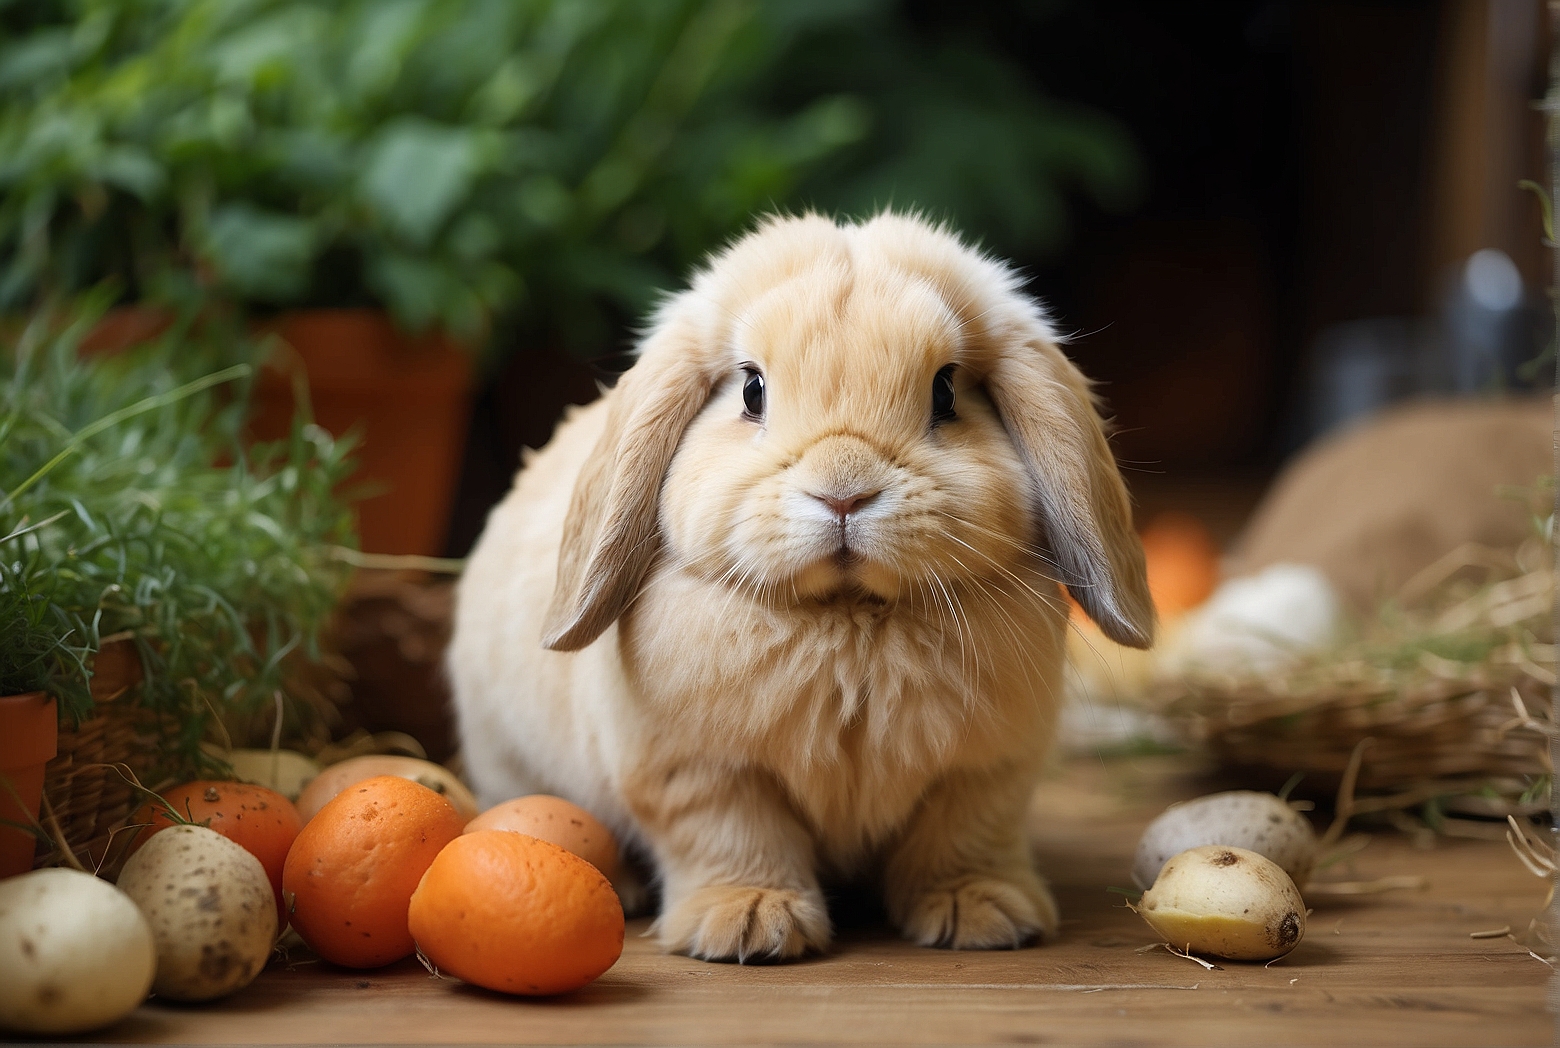 What should I feed my Holland Lop rabbit?